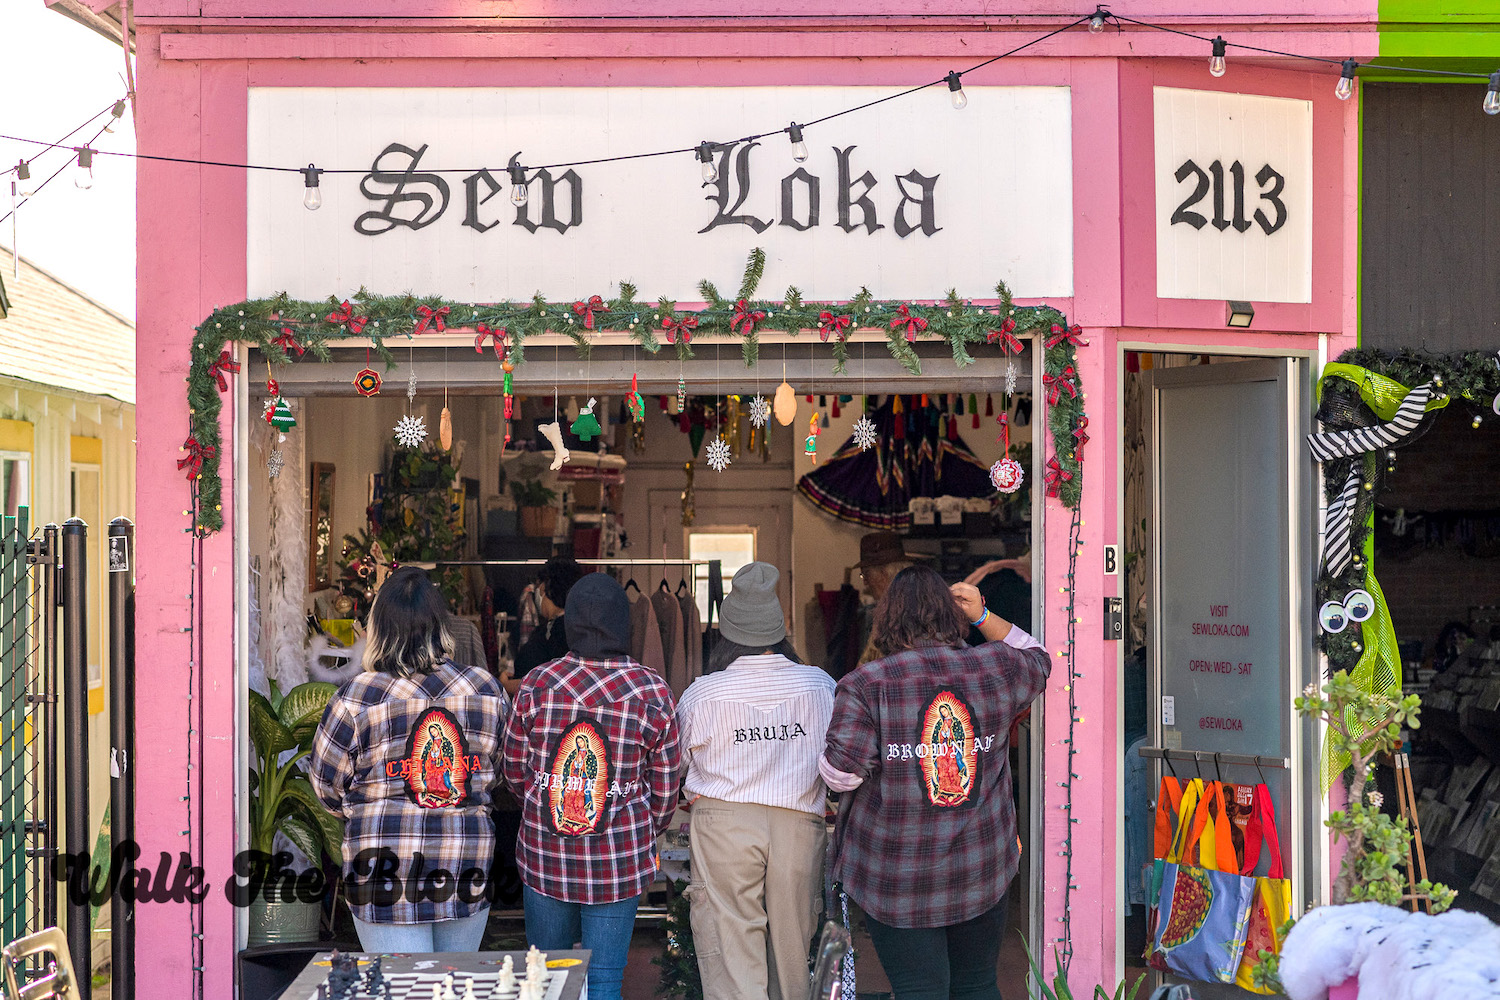 Sew Loka shopfront with embroidered designs in the Barrio Logan